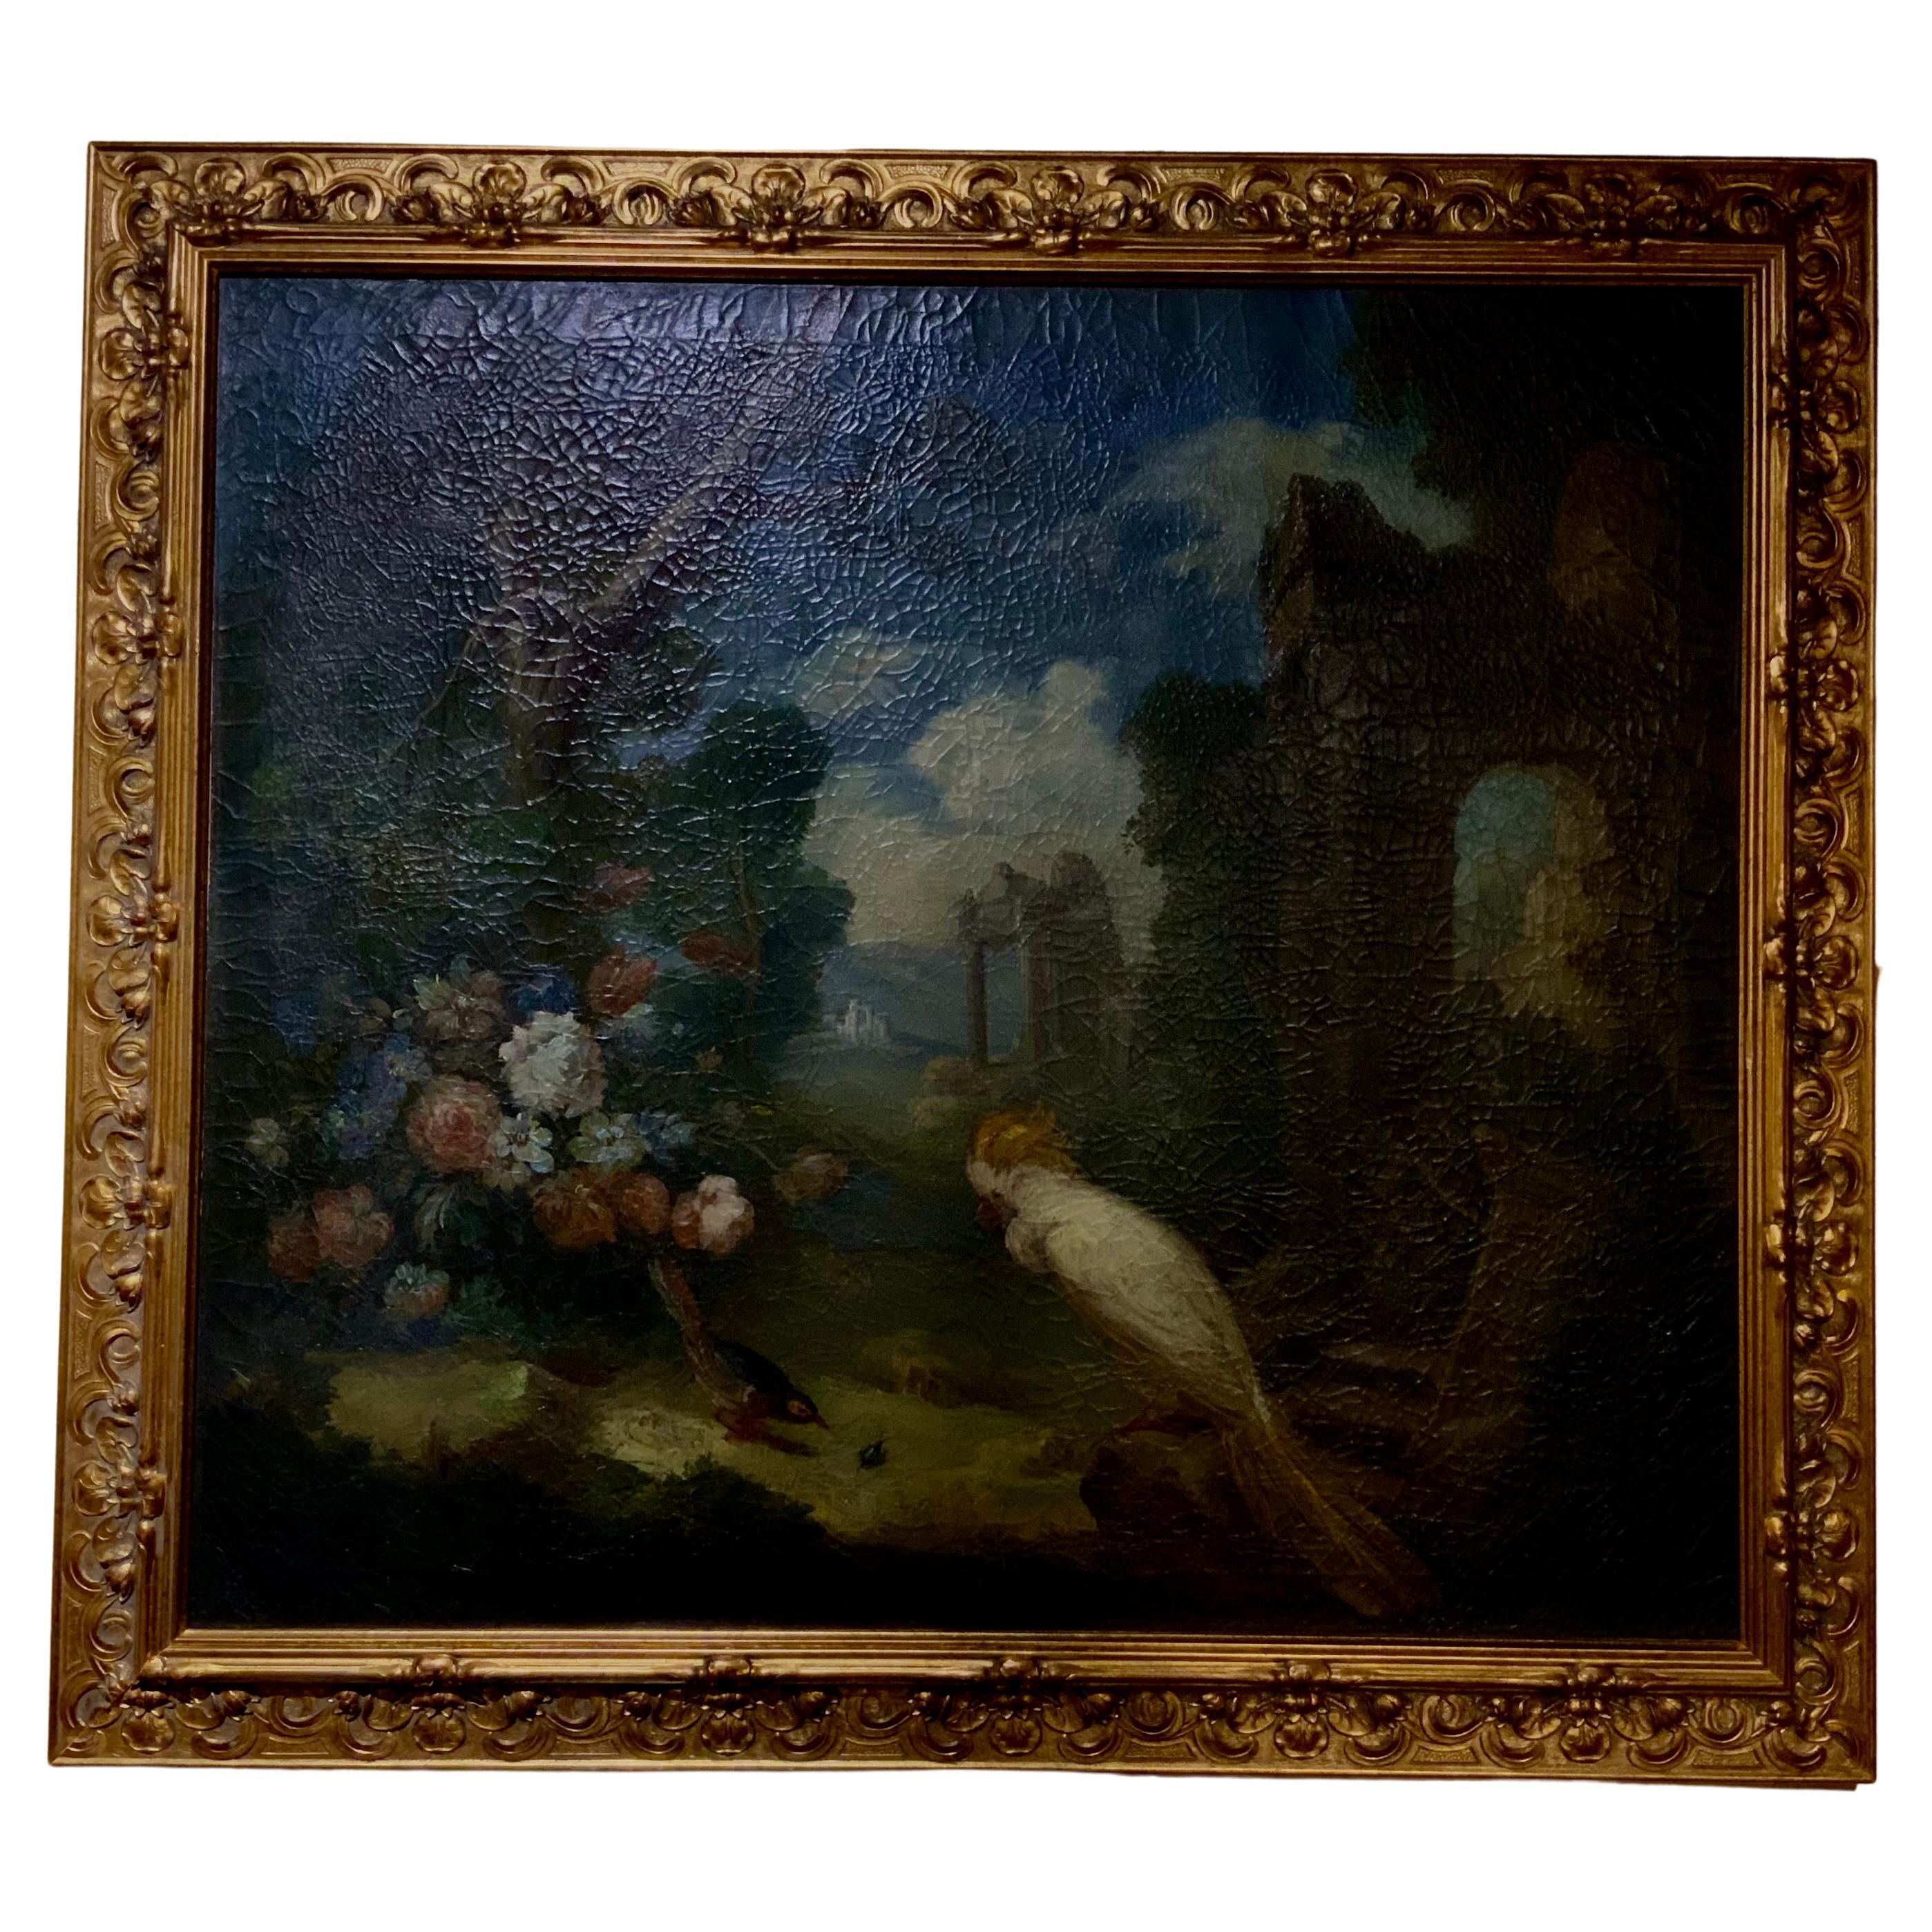 Oil on Canvas of a White Cockatoo with Flowers in Gilt Frame, 19th Century